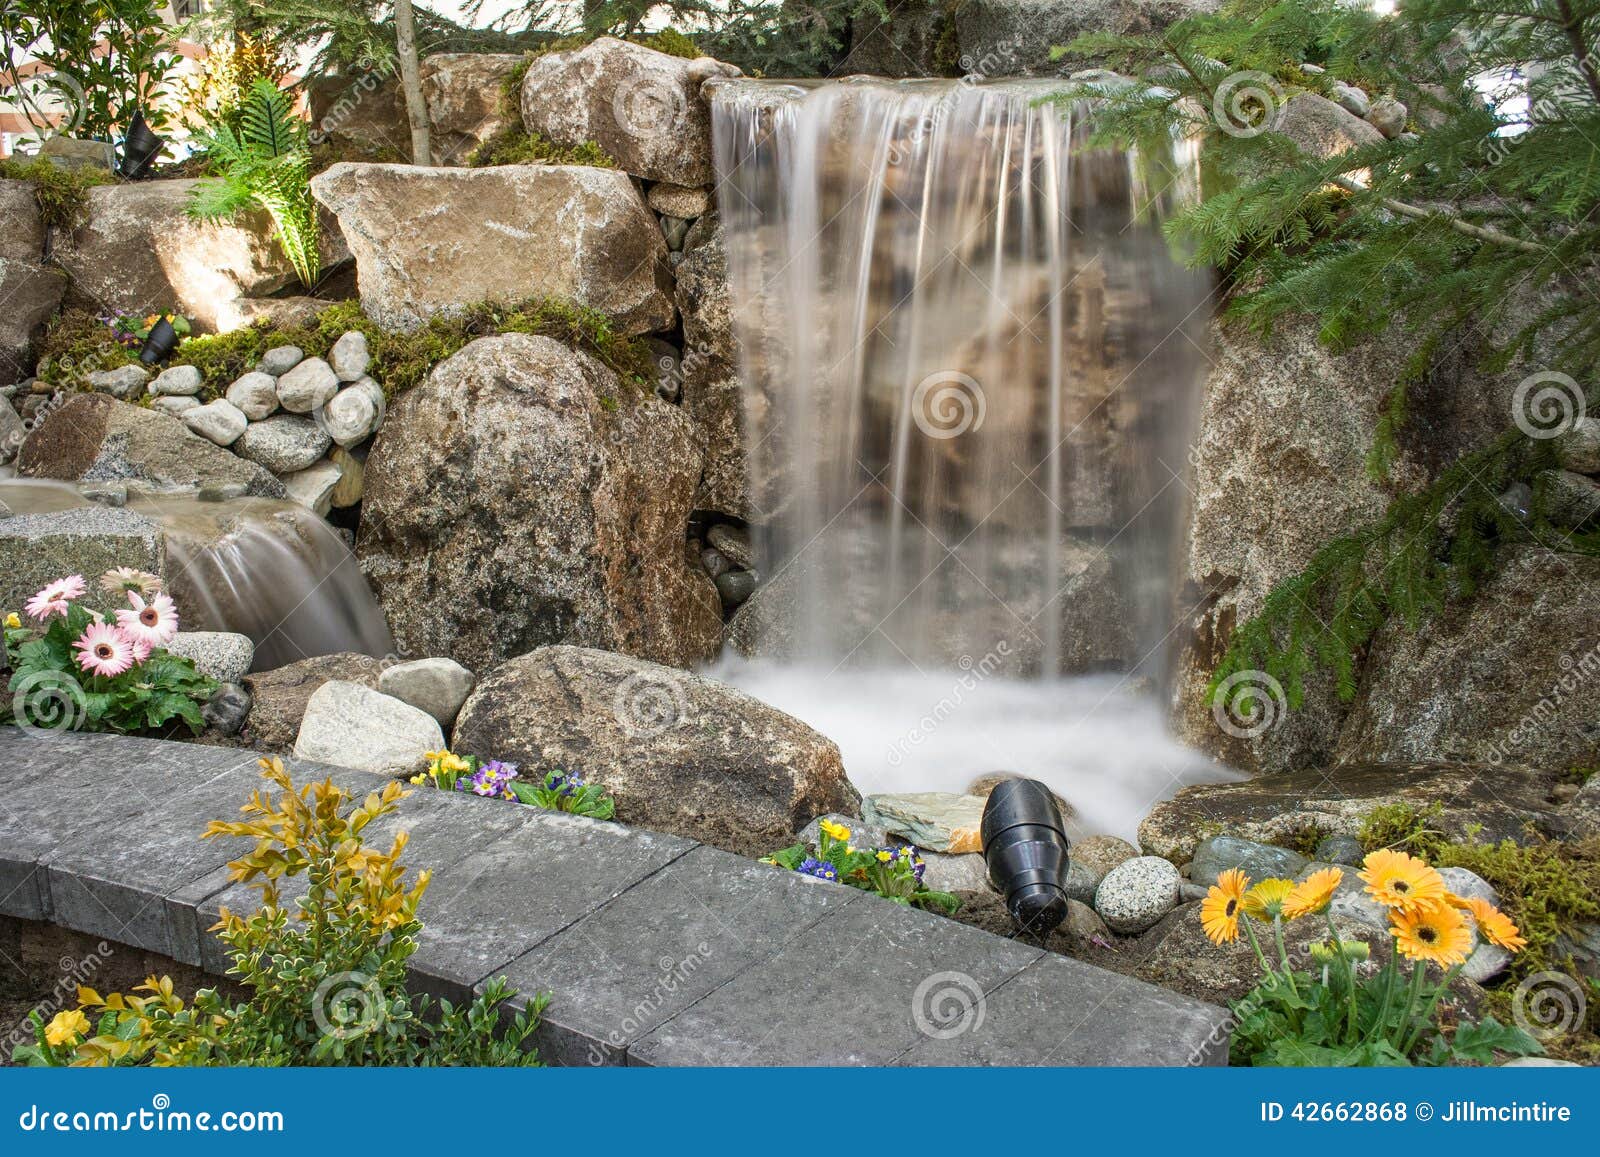 water feature with pond and flowers